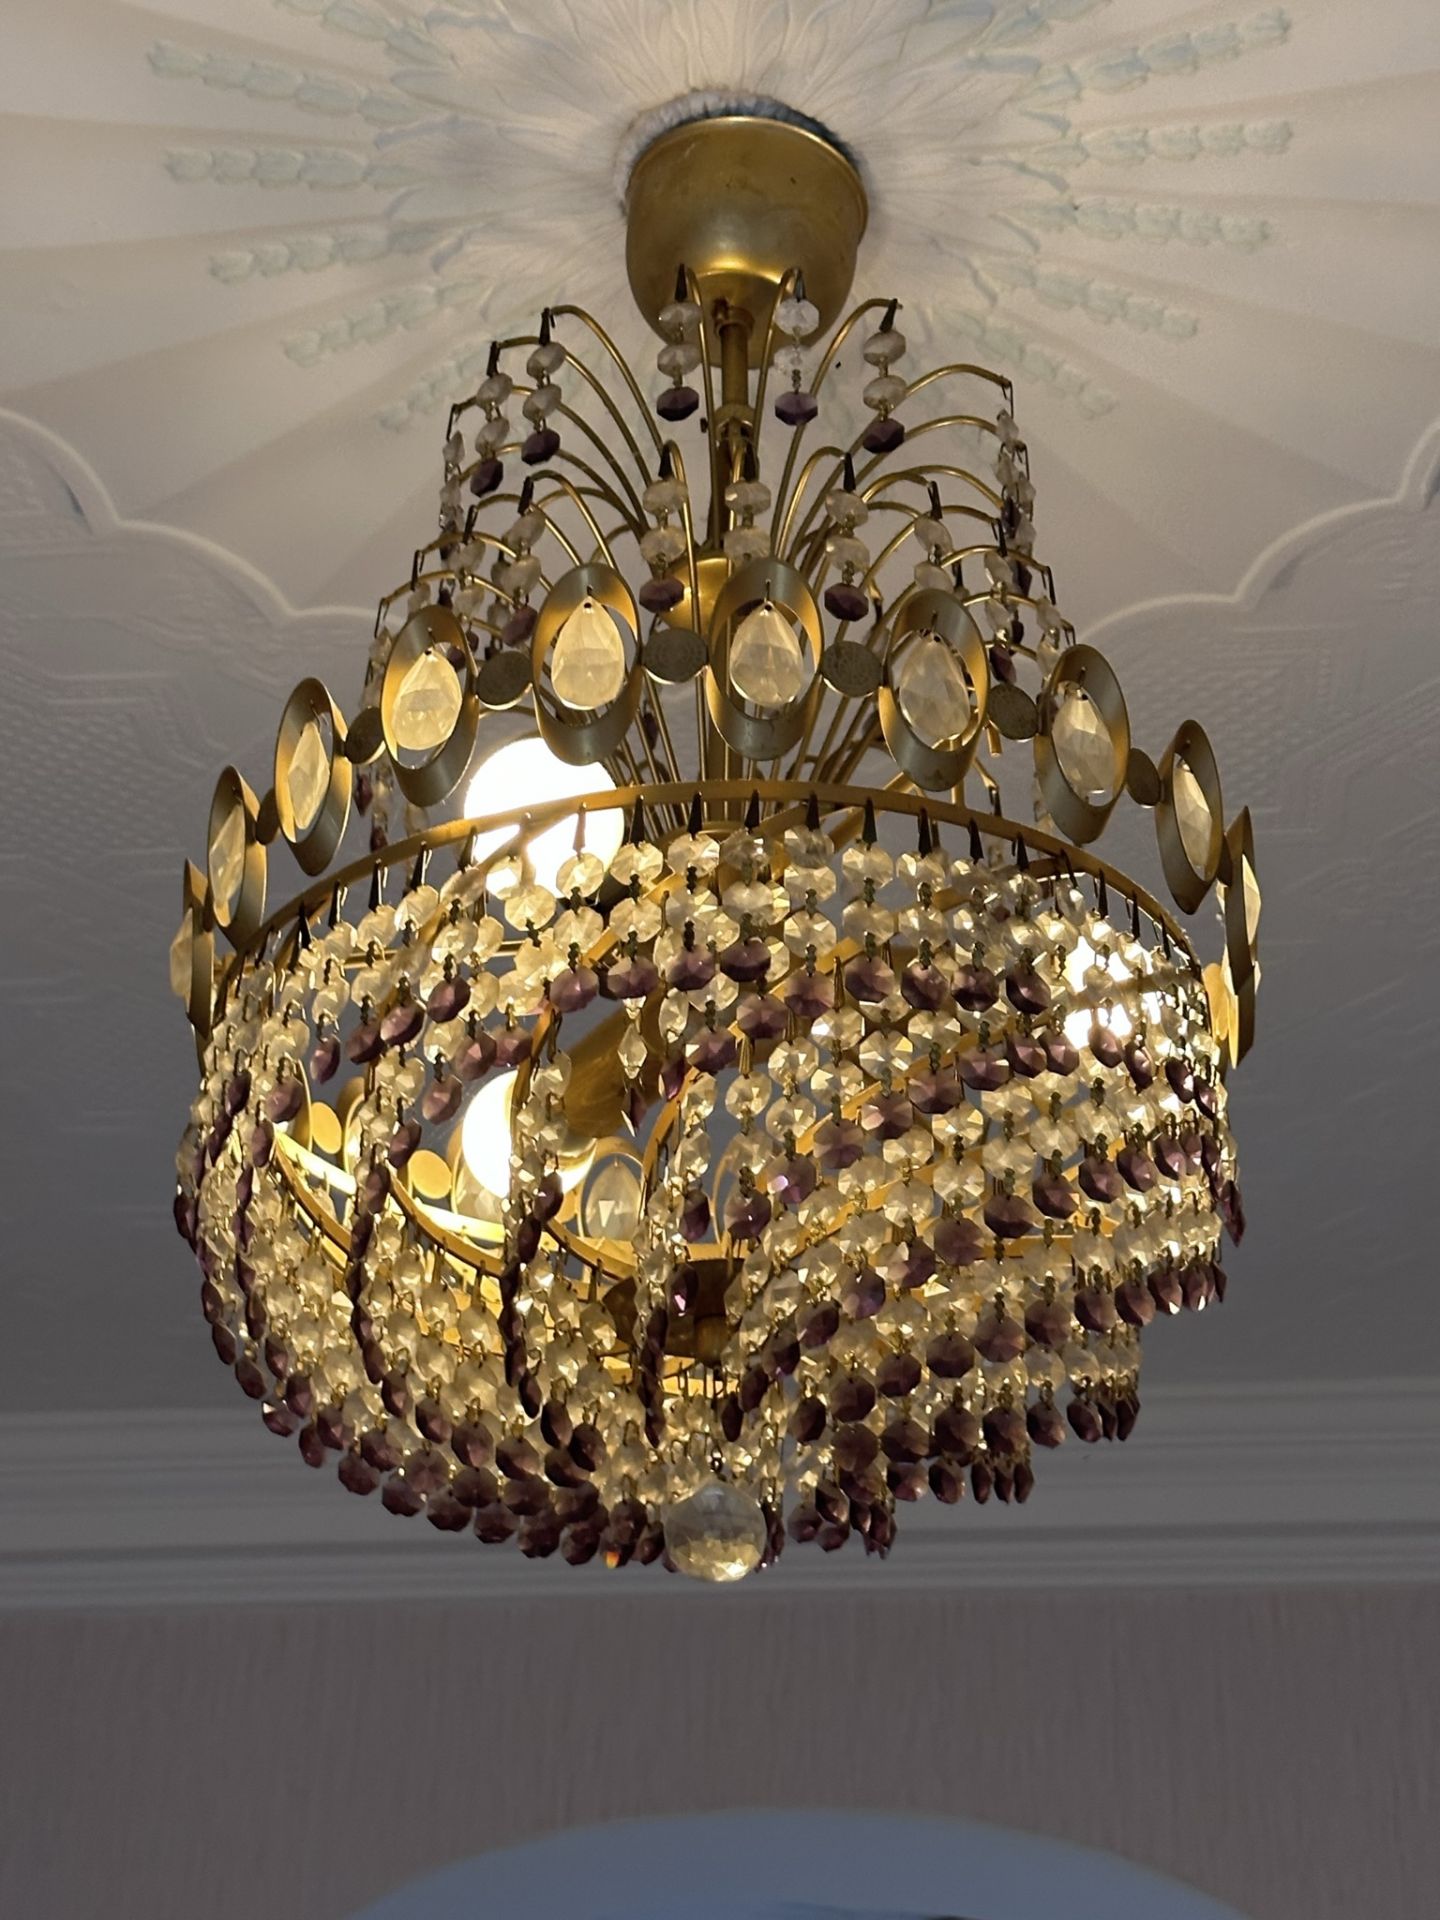 1 x Stunning REAL CRYSTAL And Gemstone Gold Plated Pendant Ceiling Light